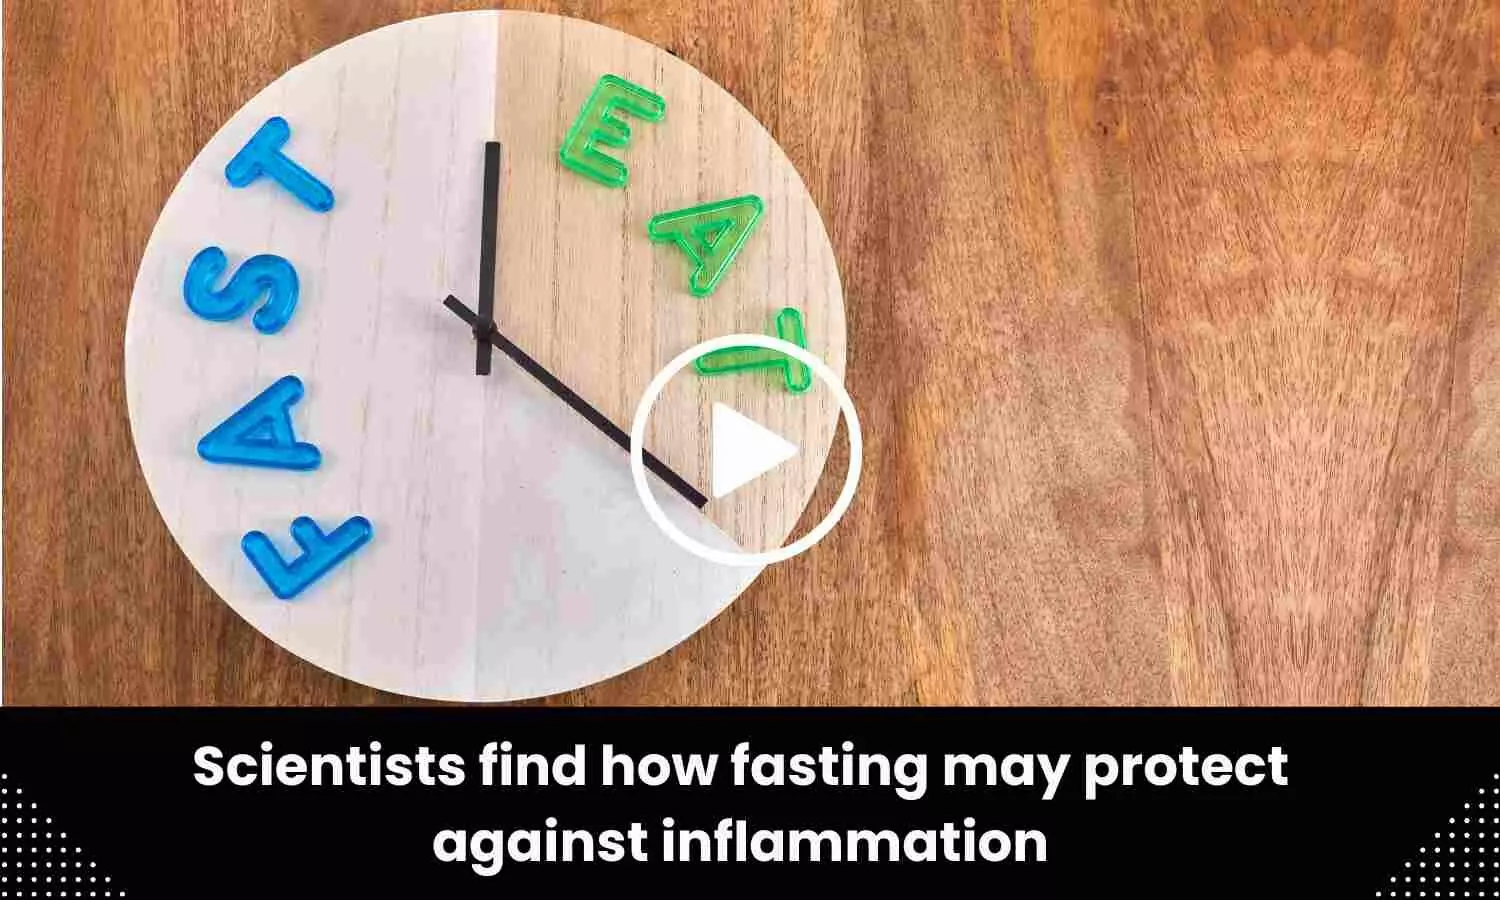 Scientists find how fasting may protect against inflammation